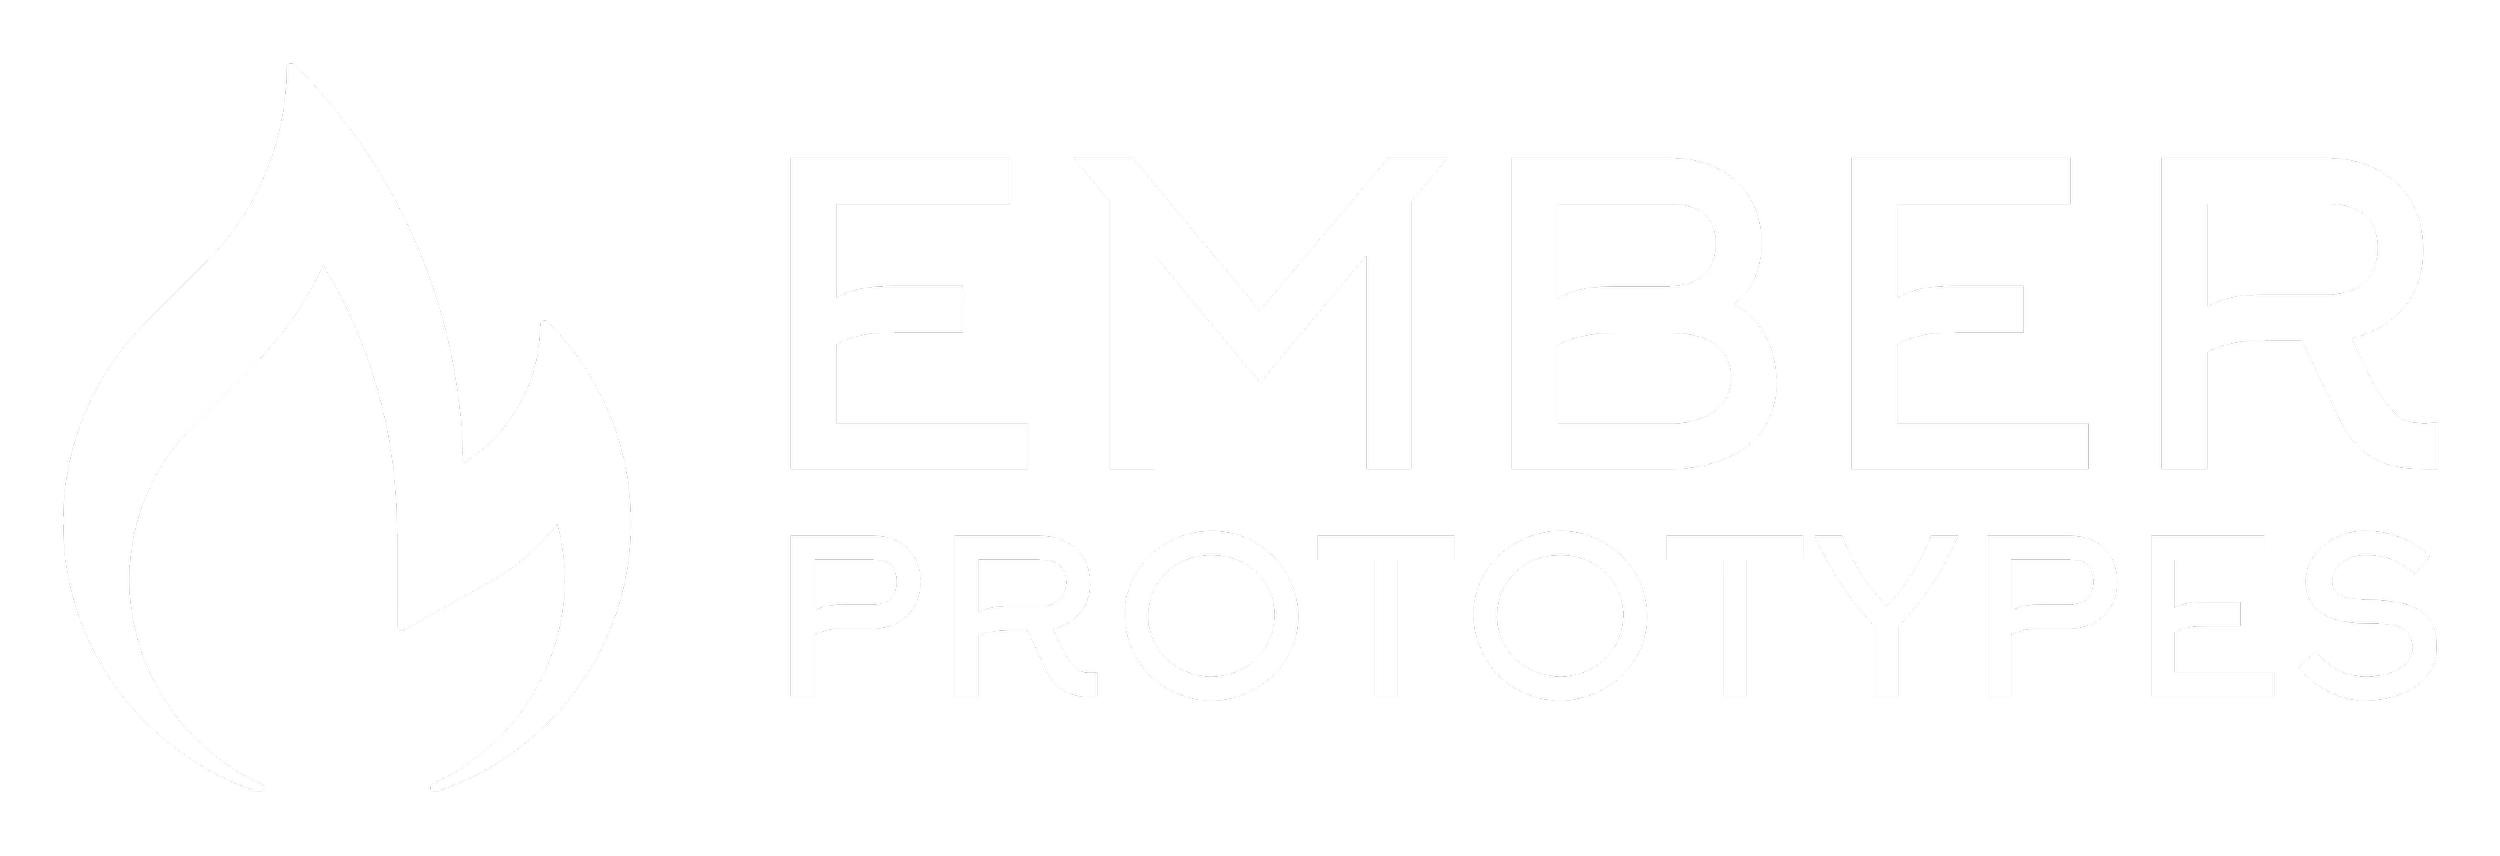 Ember Prototypes | 3D Printing Vancouver, Rapid Prototyping, Engineering Design